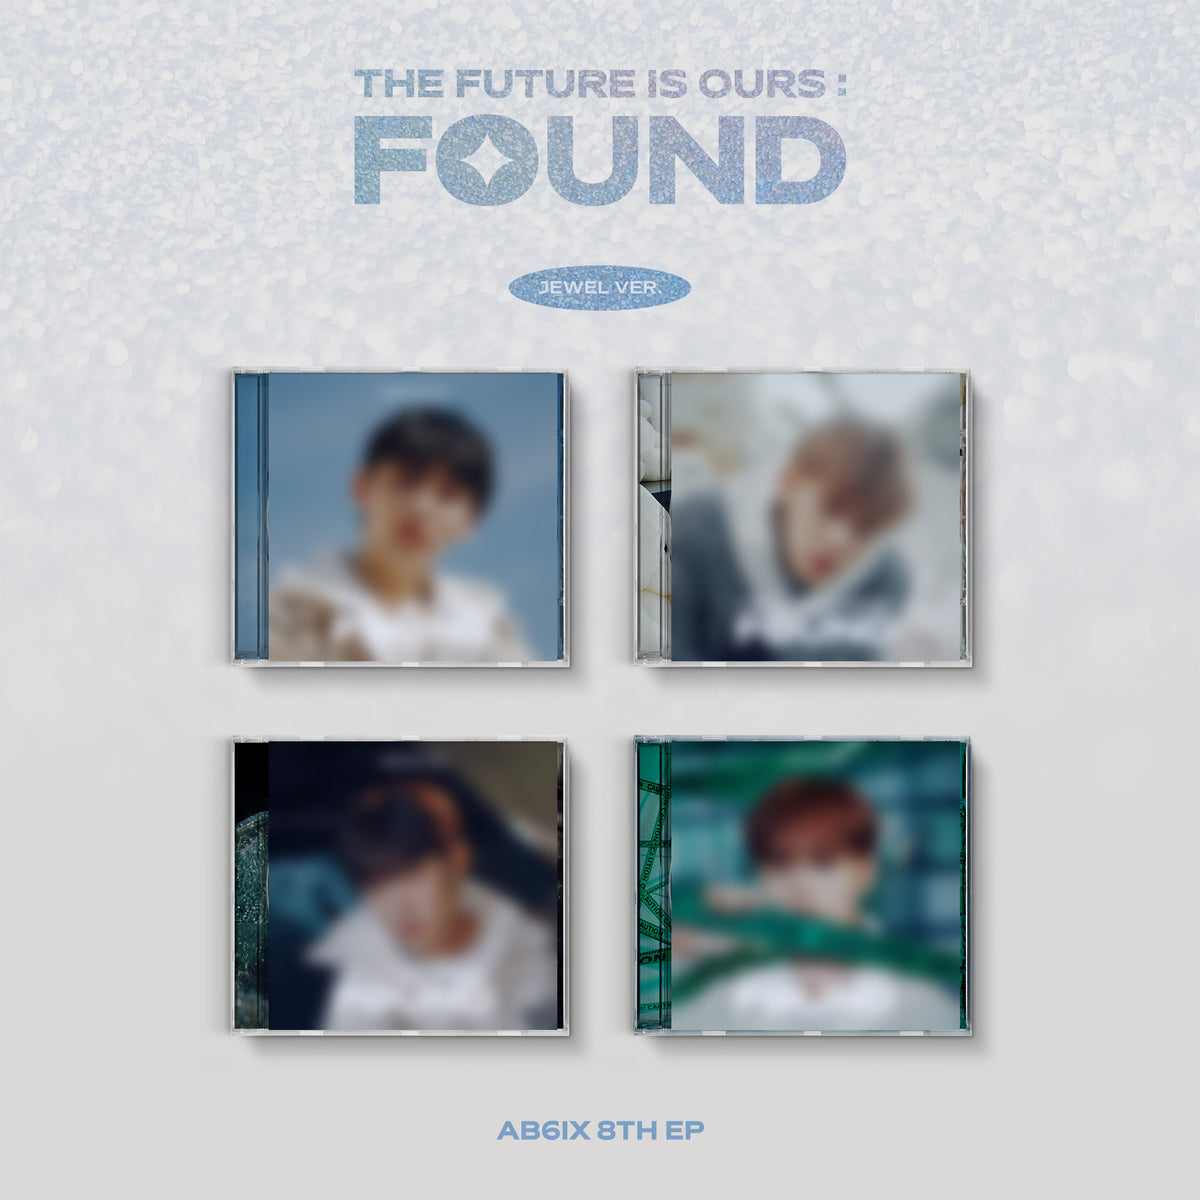 AB6IX - 8TH EP [THE FUTURE IS OURS : FOUND] JEWEL VER.